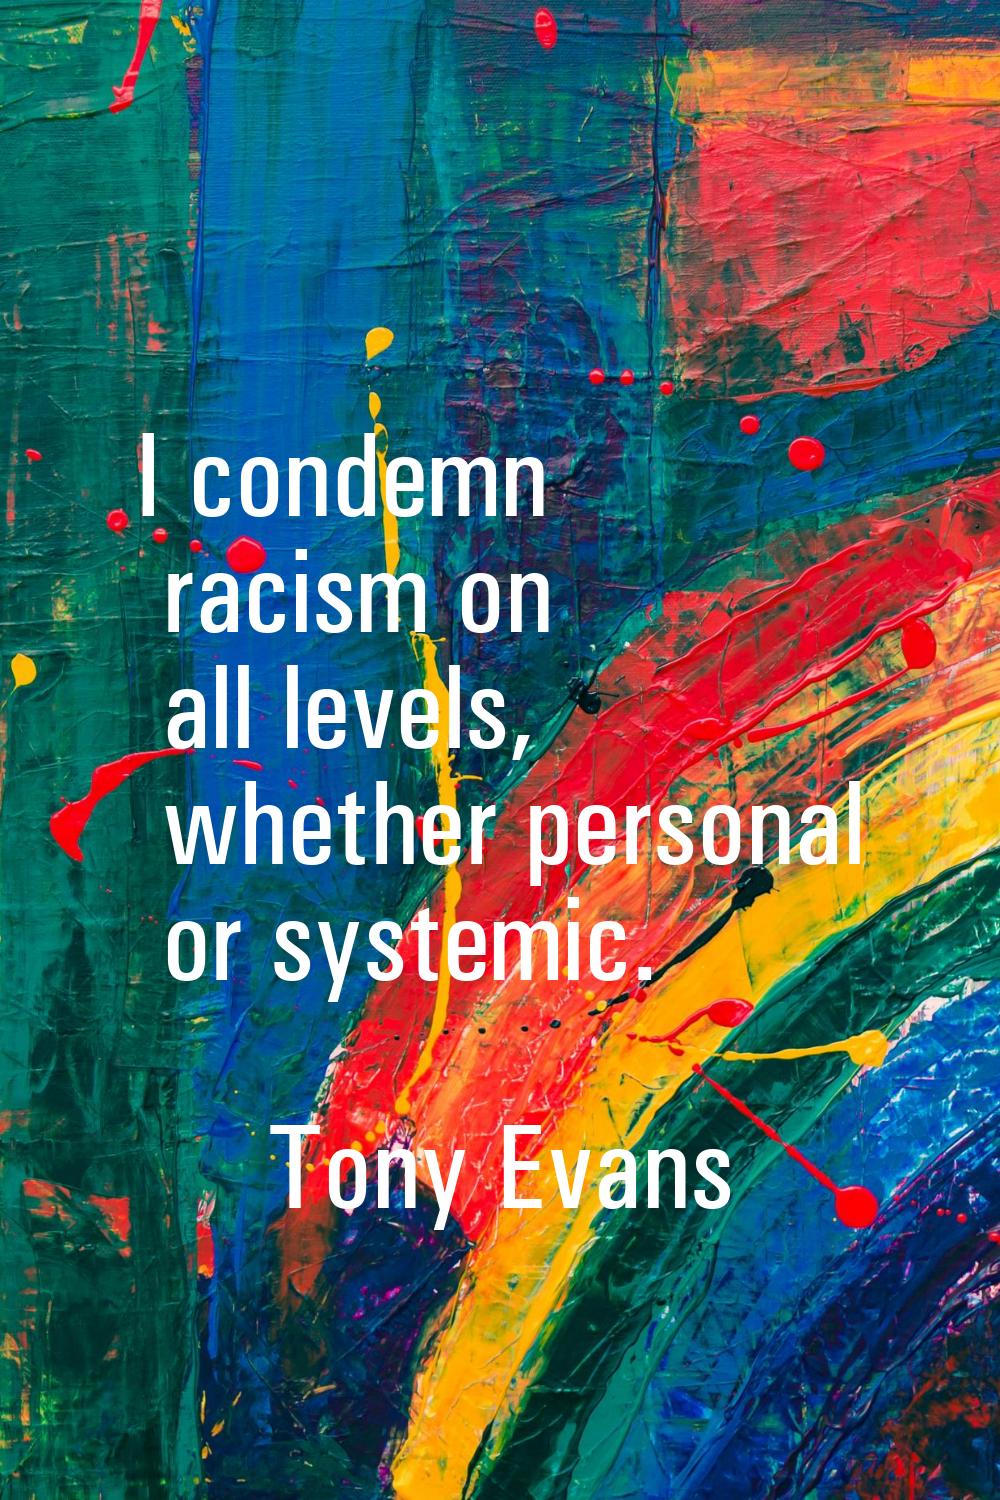 I condemn racism on all levels, whether personal or systemic.